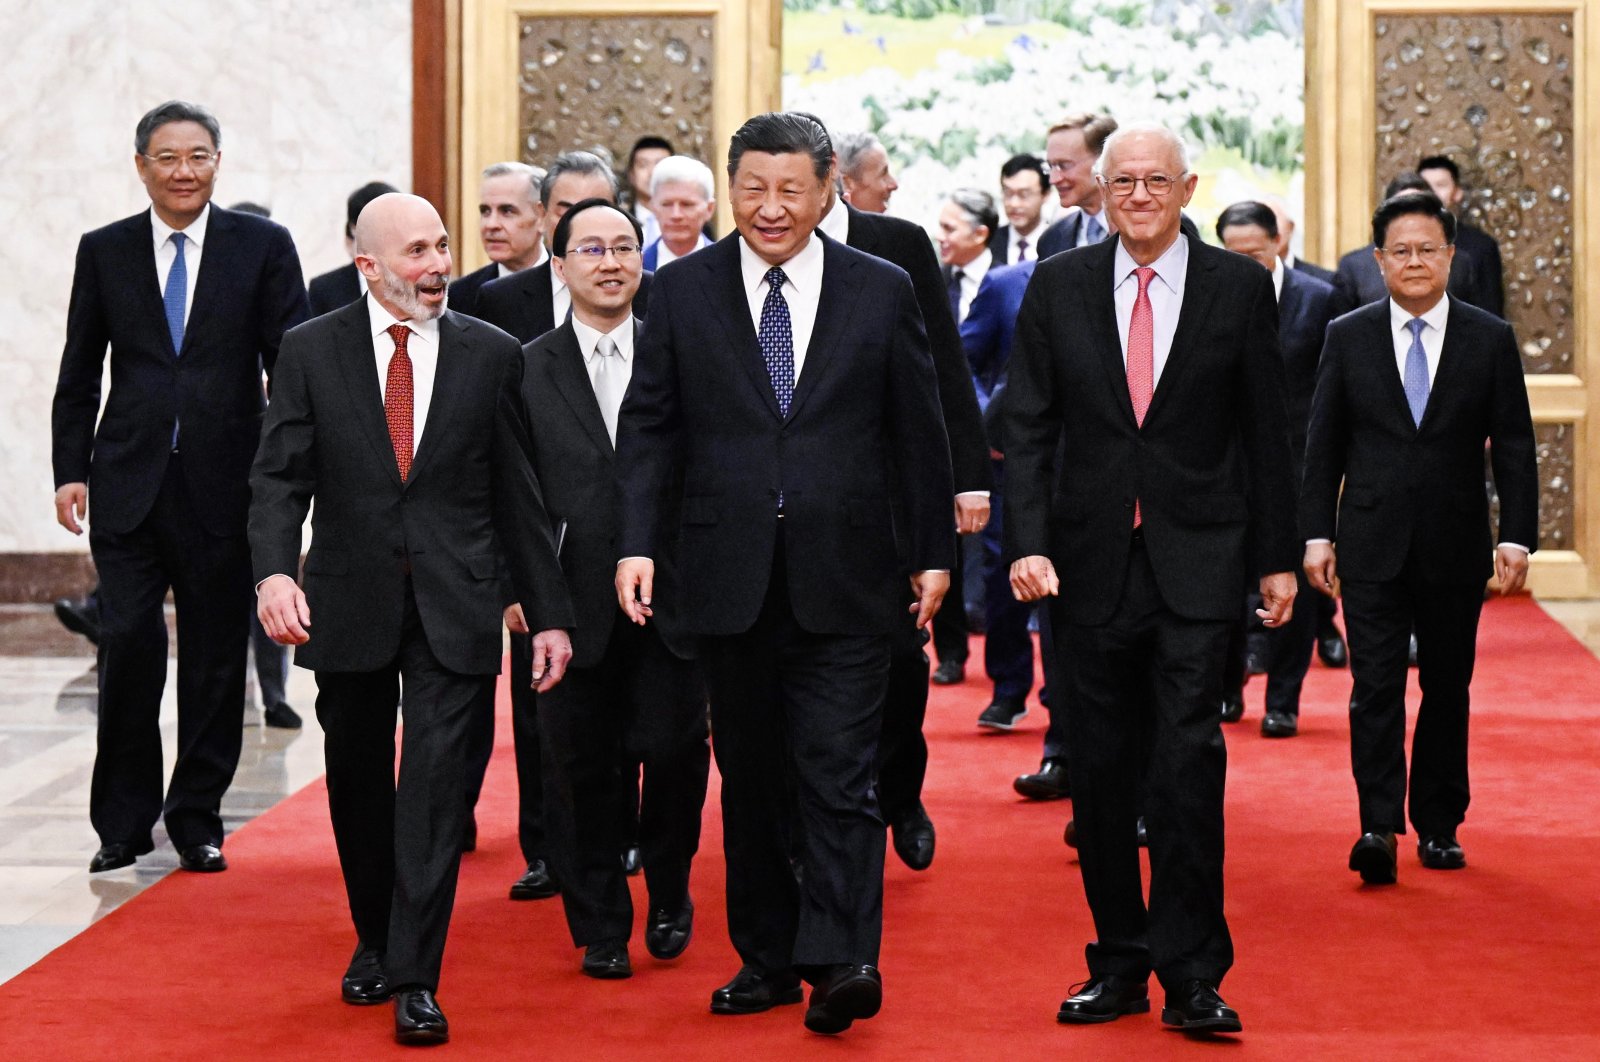 Chinese President Xi Jinping (C) walks with representatives from American business, strategic and academic communities at the Great Hall of the People in Beijing, China, March 27, 2024. (Xinhua via AP)